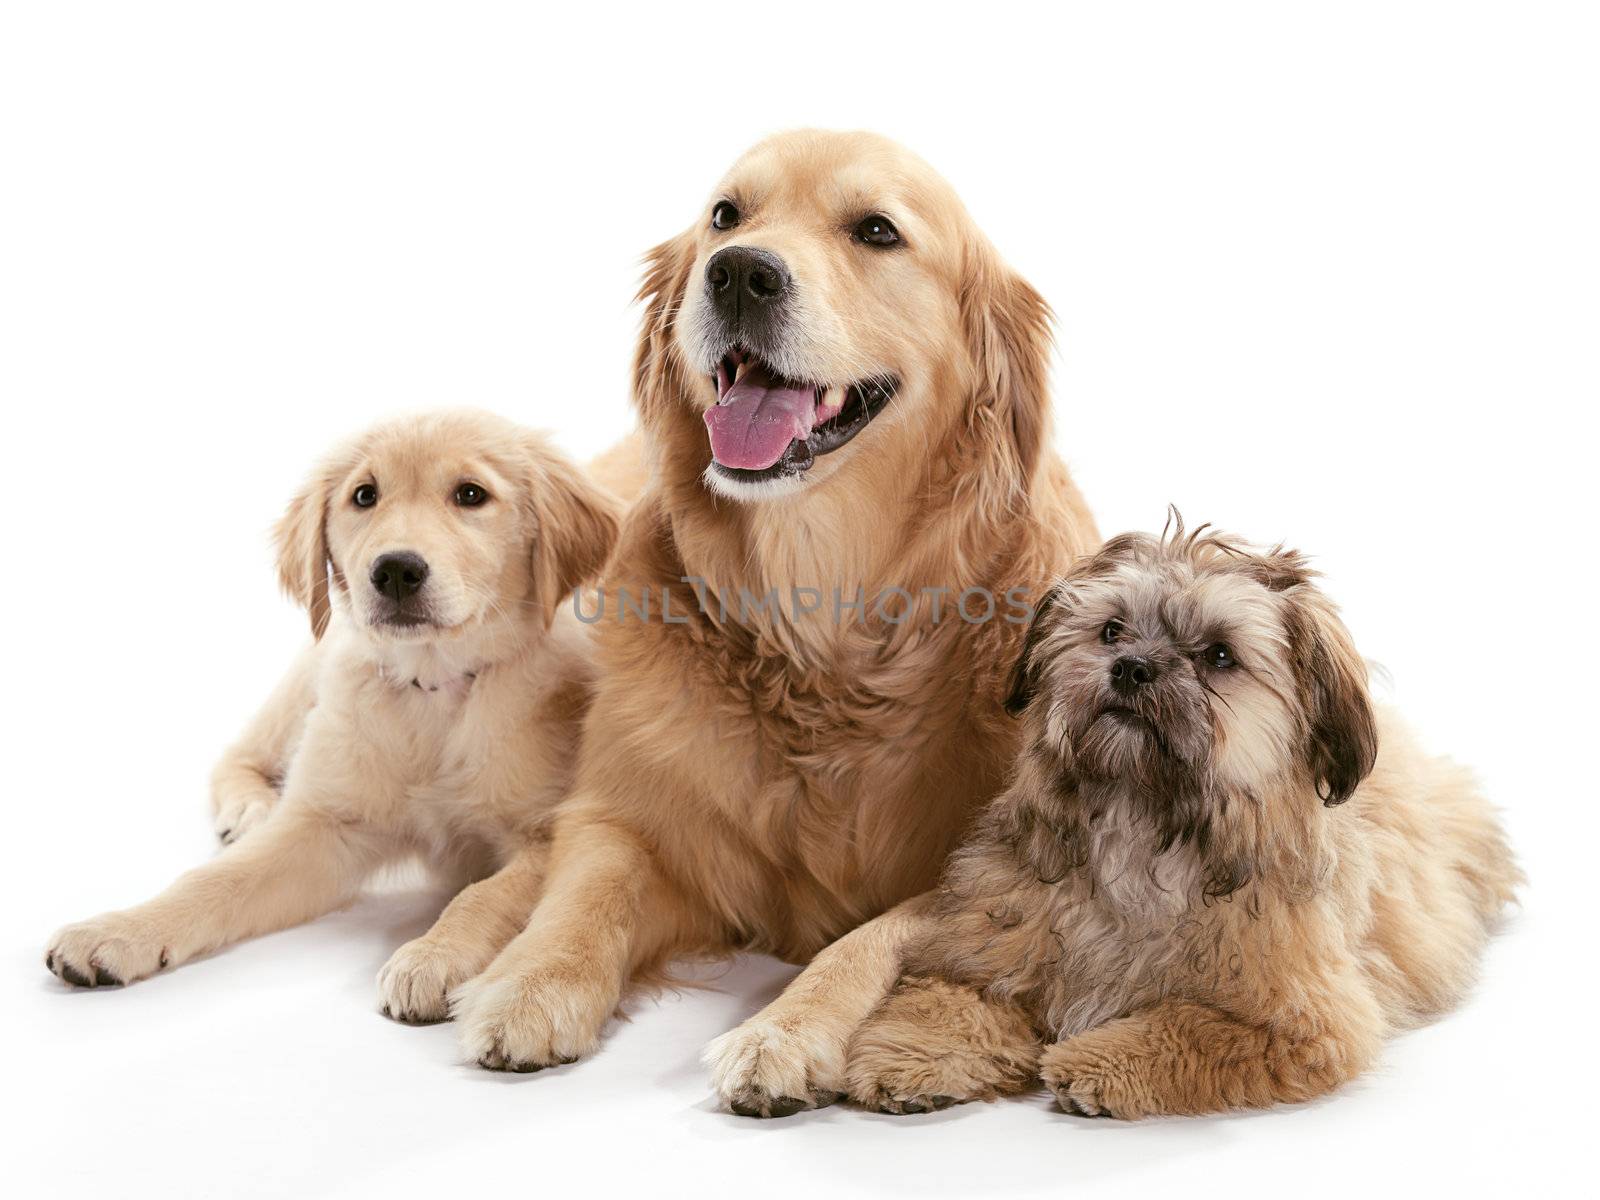 Two Golden Retriever and a Shi Poo laying together